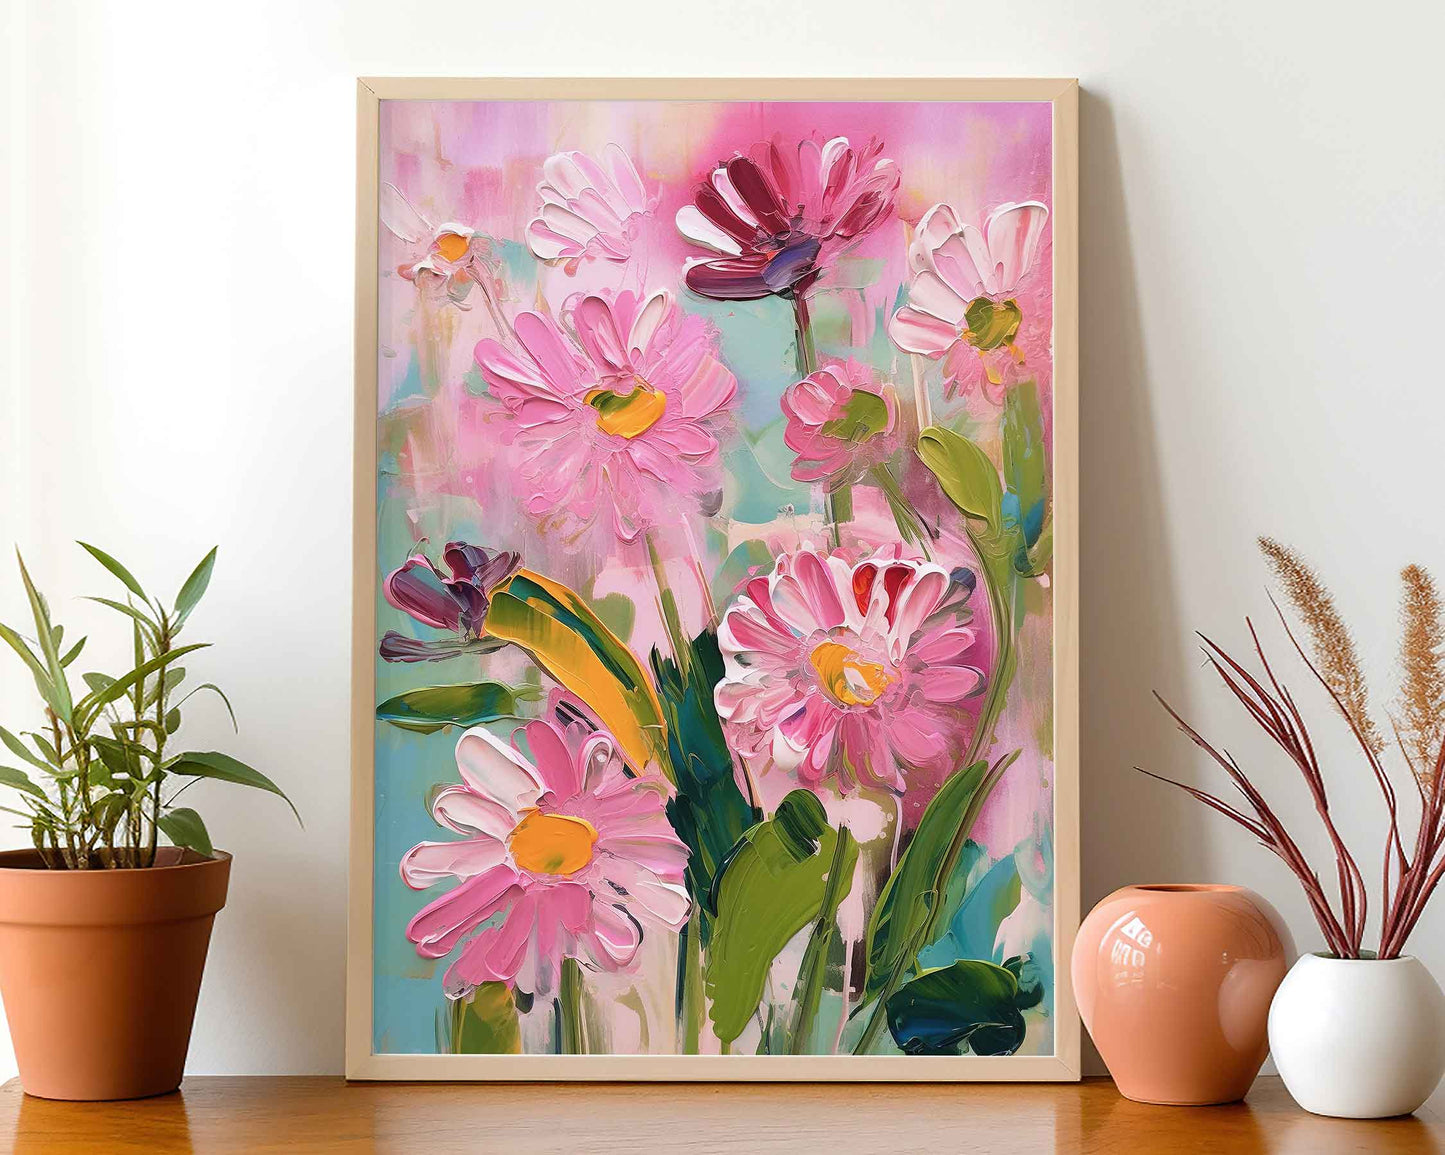 Framed Image of Pink Flowers Abstract Vintage Oil Paintings Wall Art Poster Print Gift